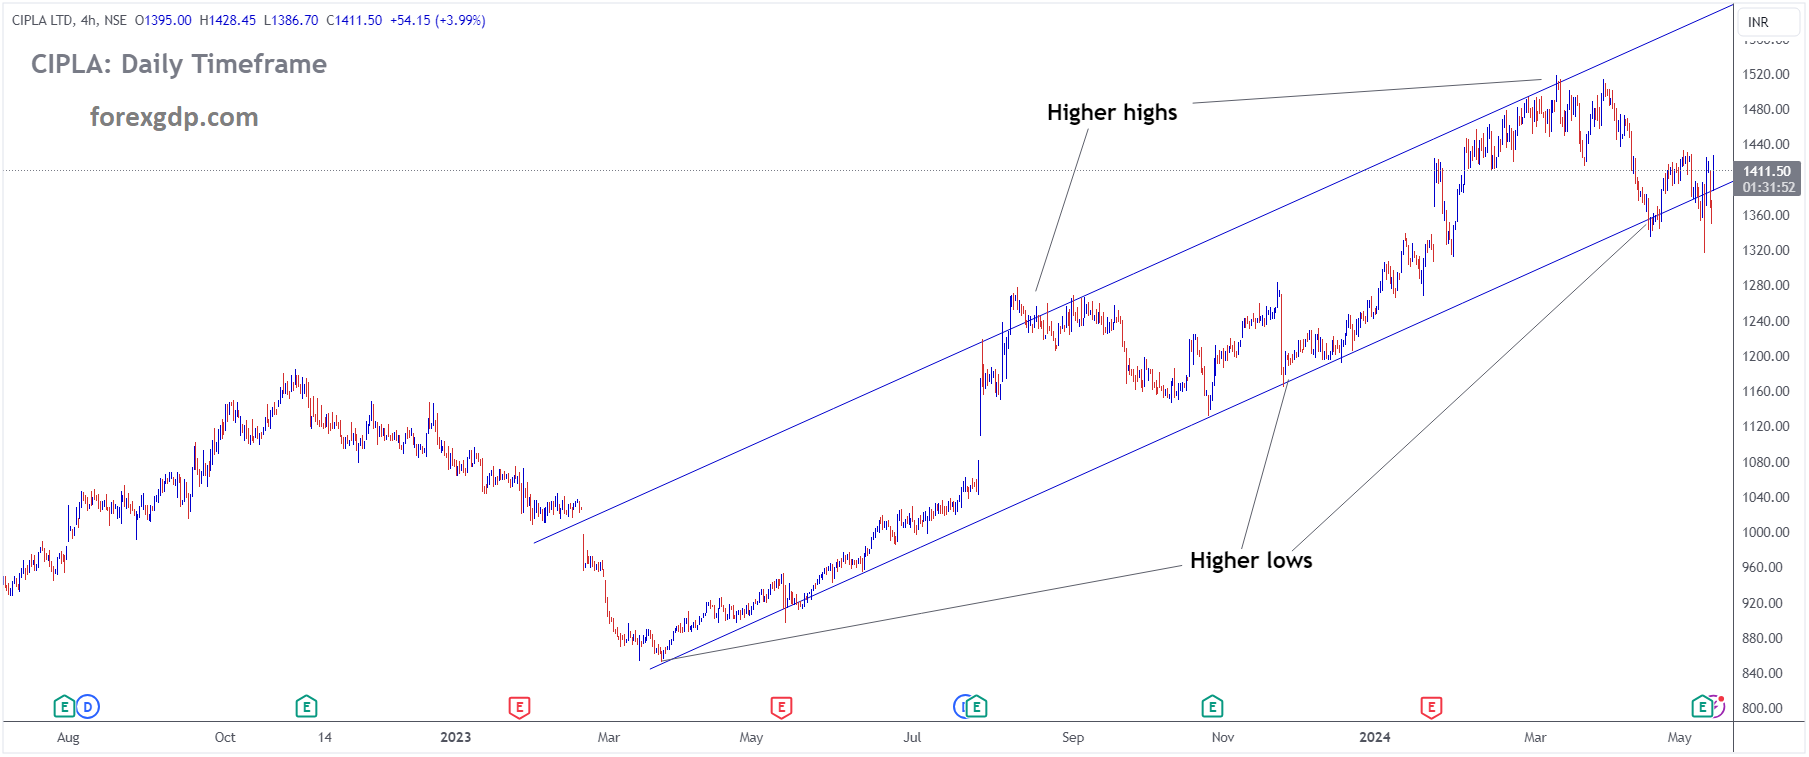 CIPLA Market price is moving in Ascending channel and market has reached higher low area of the channel